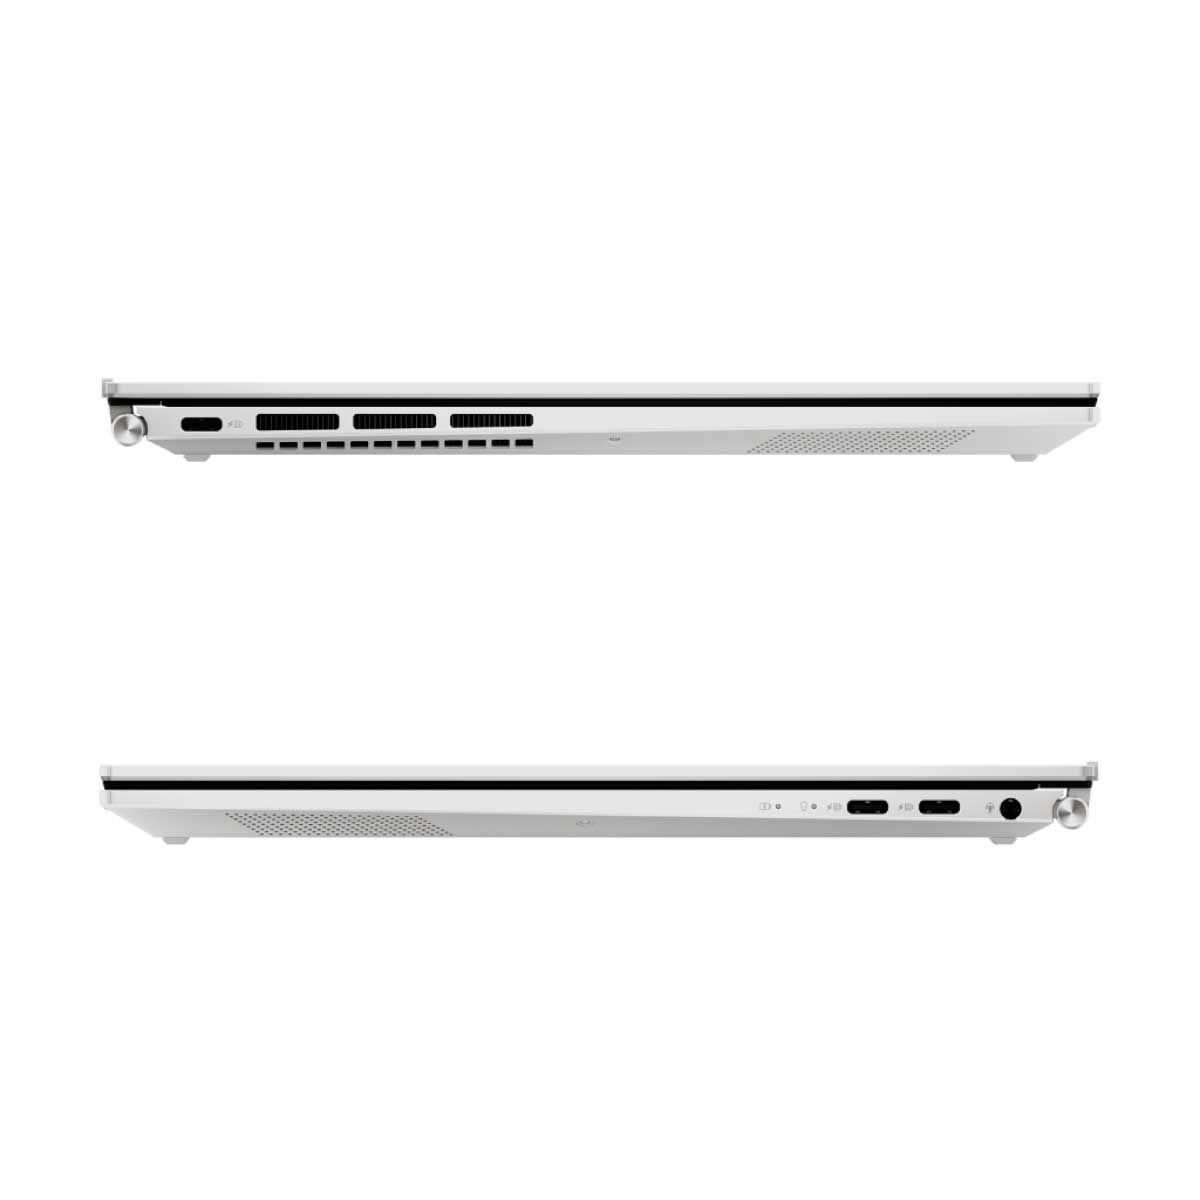 NOTEBOOK (โน้ตบุ๊ค) ASUS ZENBOOK S13 OLED UM5302LA-LV755WS (REFINED WHITE)